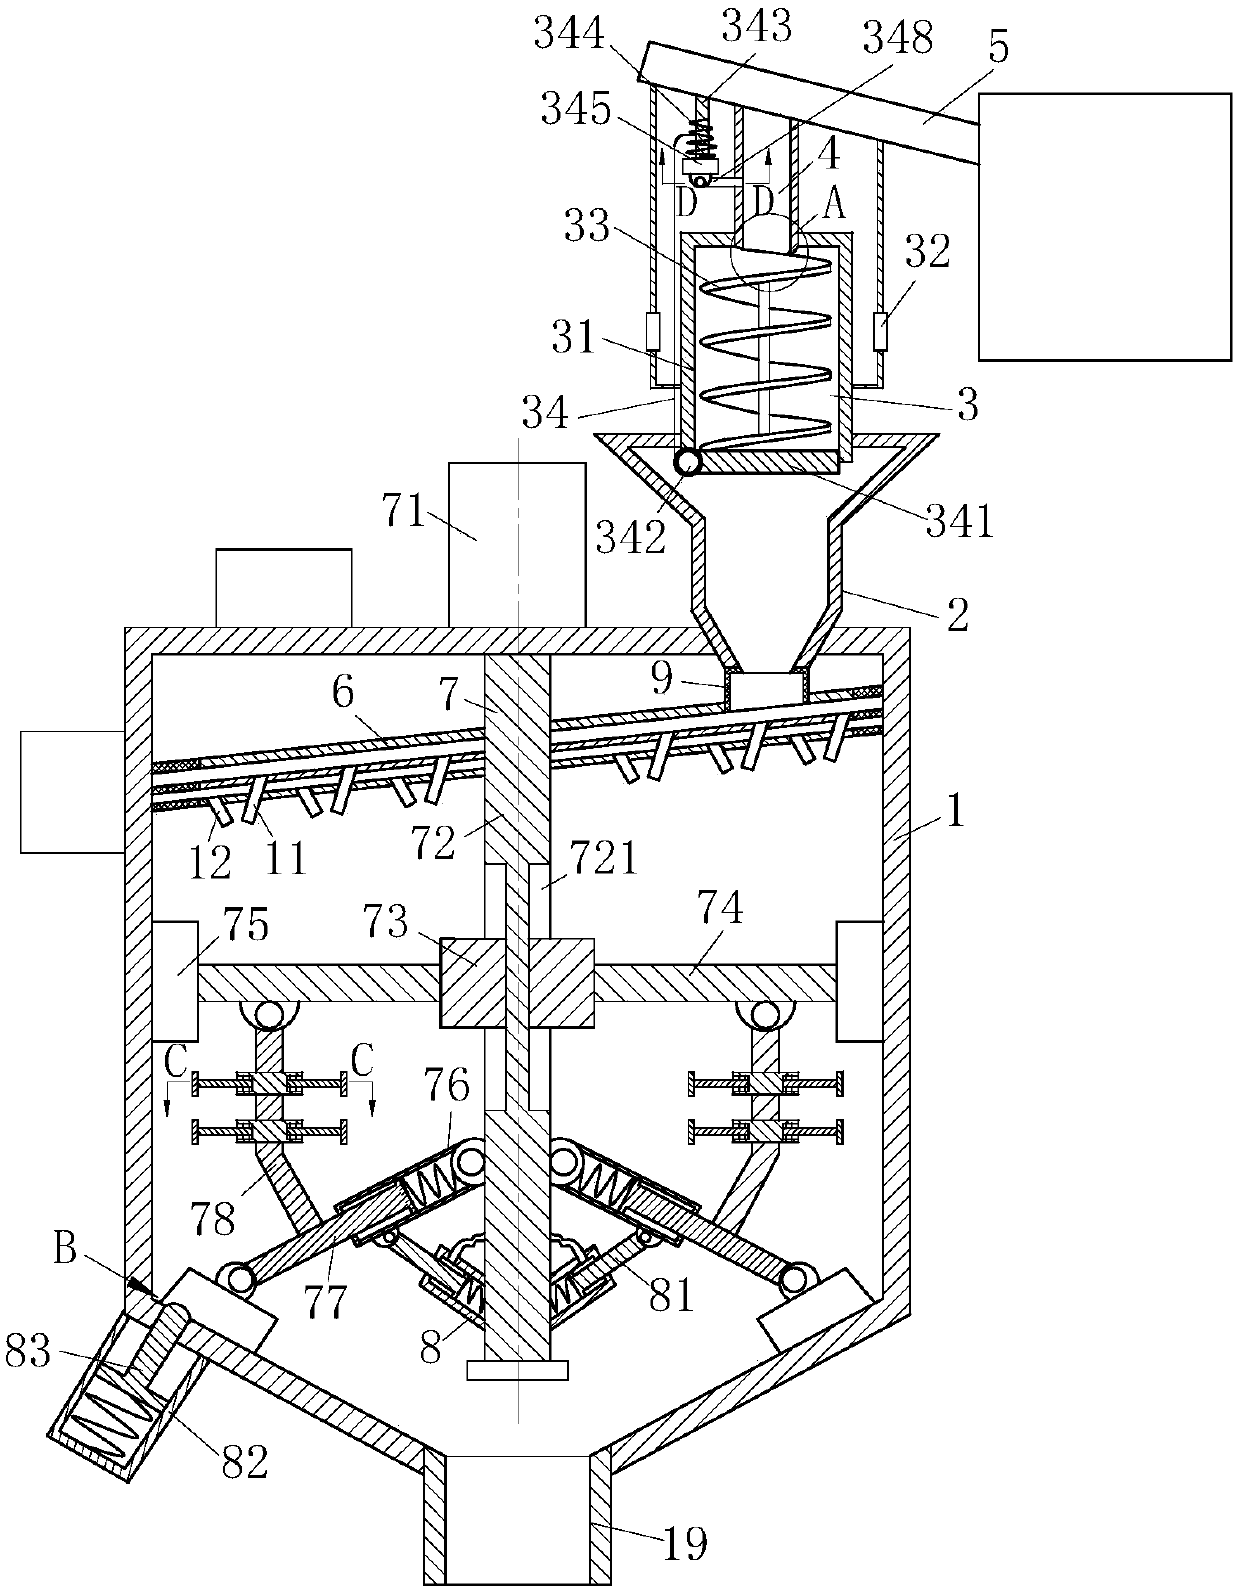 Concrete production device with automatic material control function